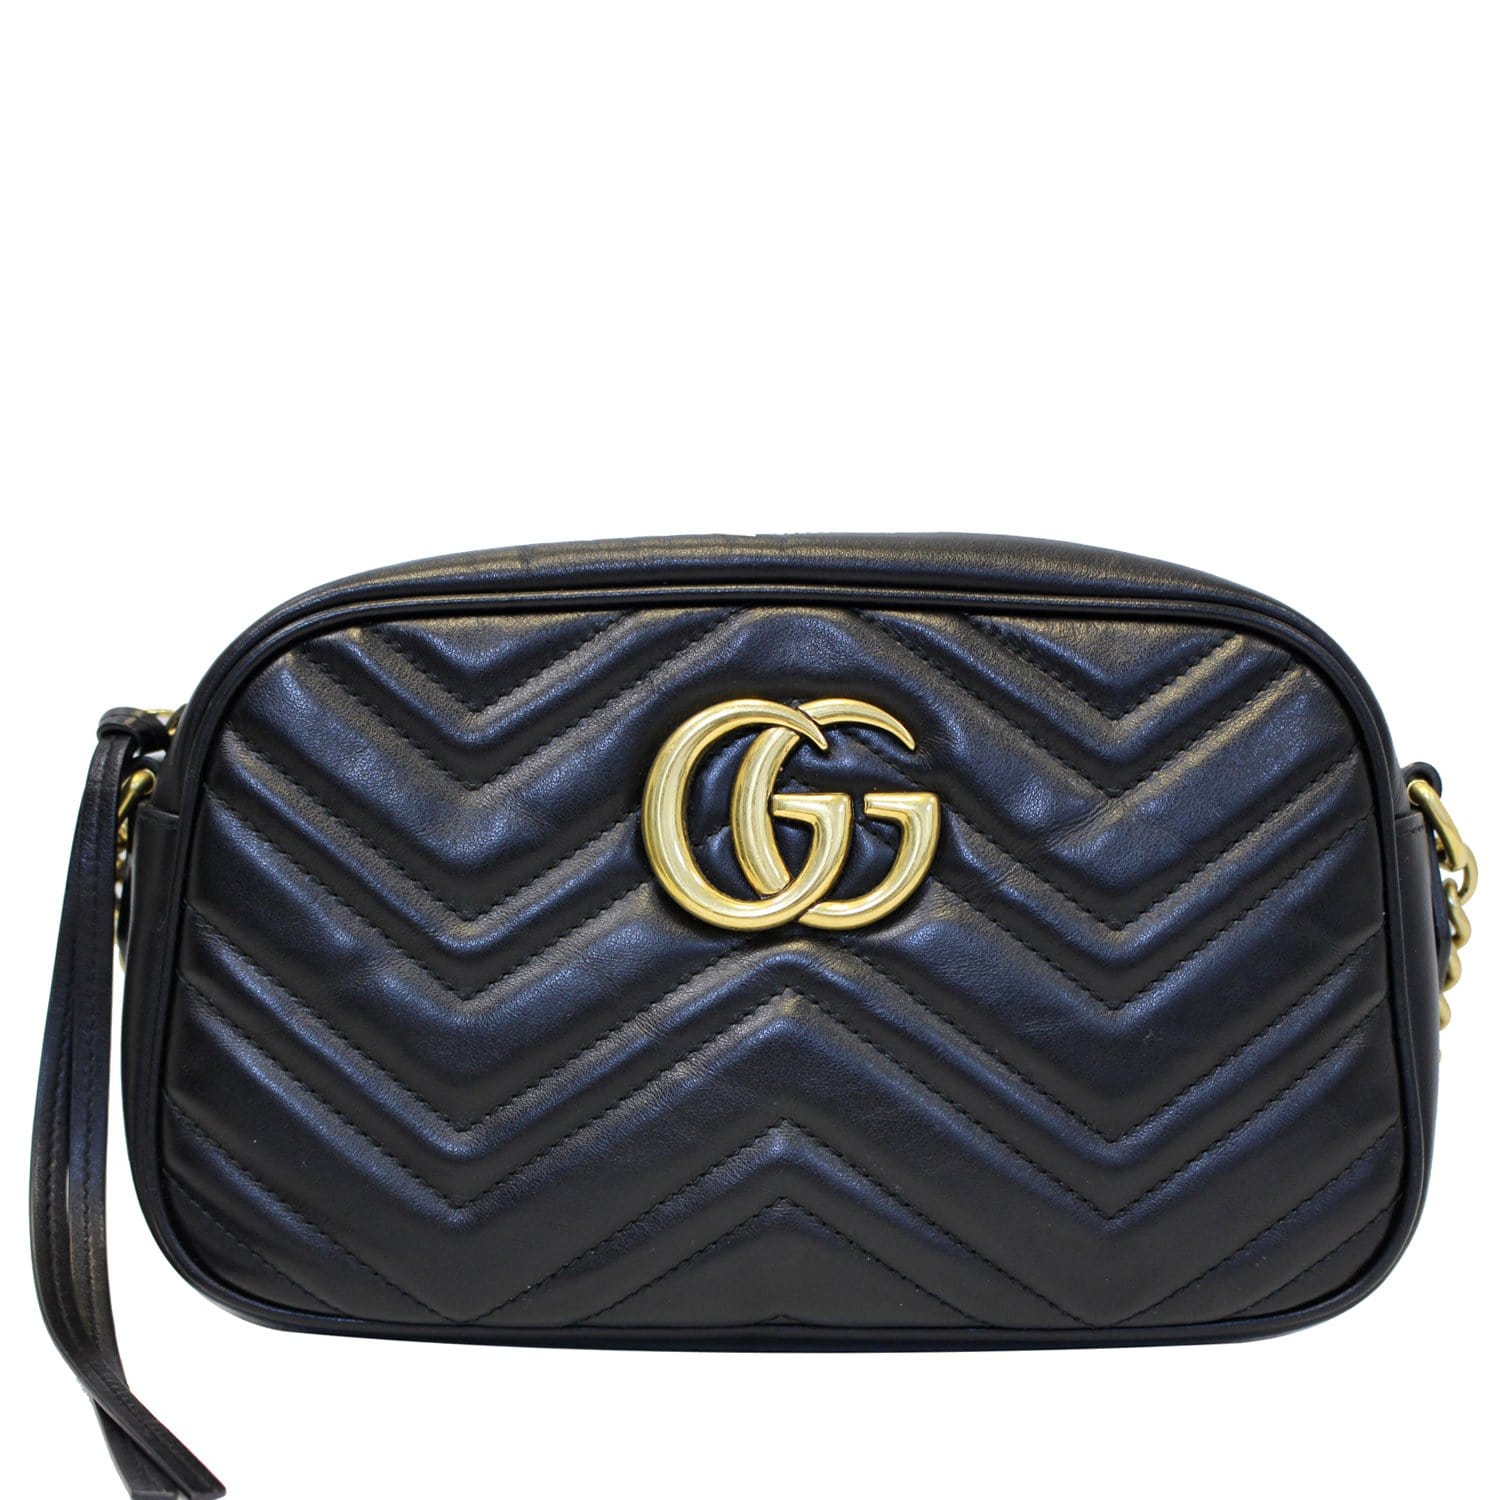 Gucci Marmont - Pre-owned Women's Leather Cross Body Bag - Black - One Size